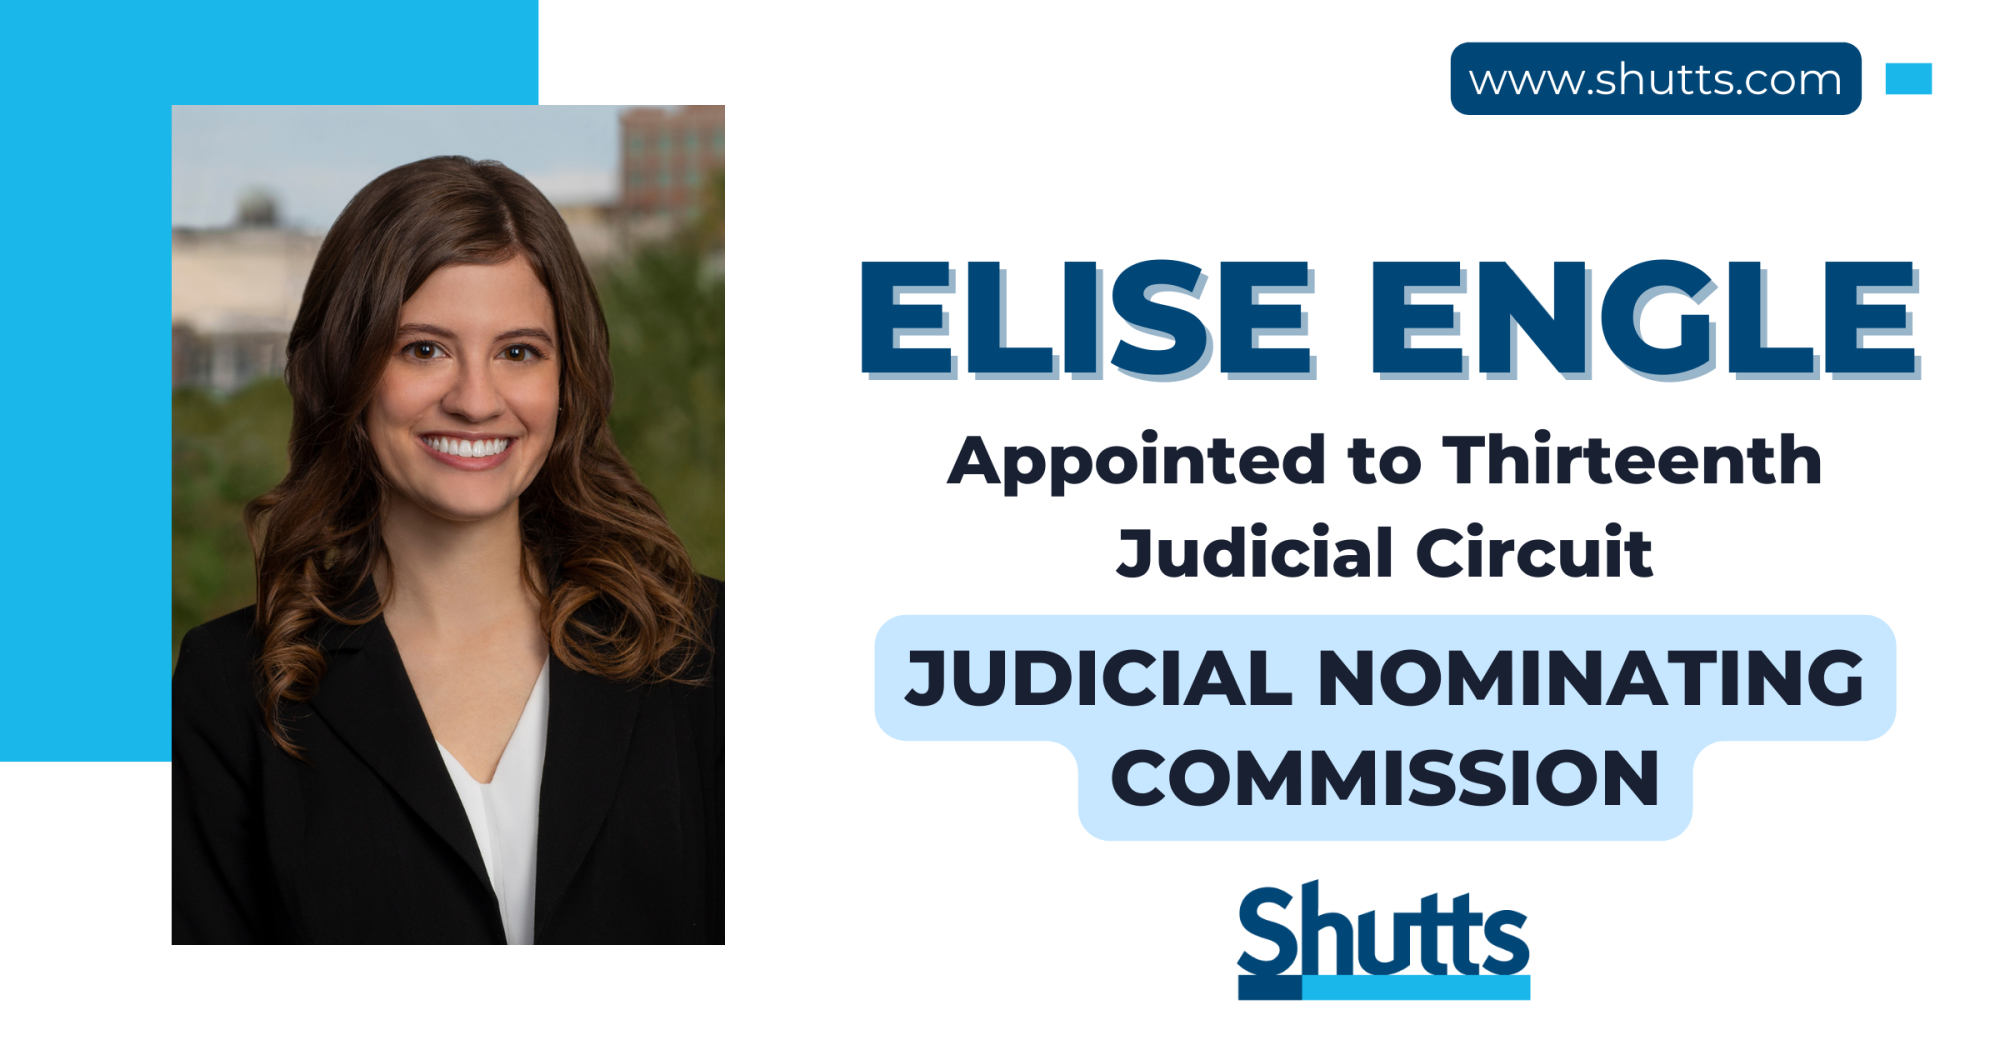 Elise Engle Appointed to Thirteenth Judicial Circuit Judicial Nominating Commission